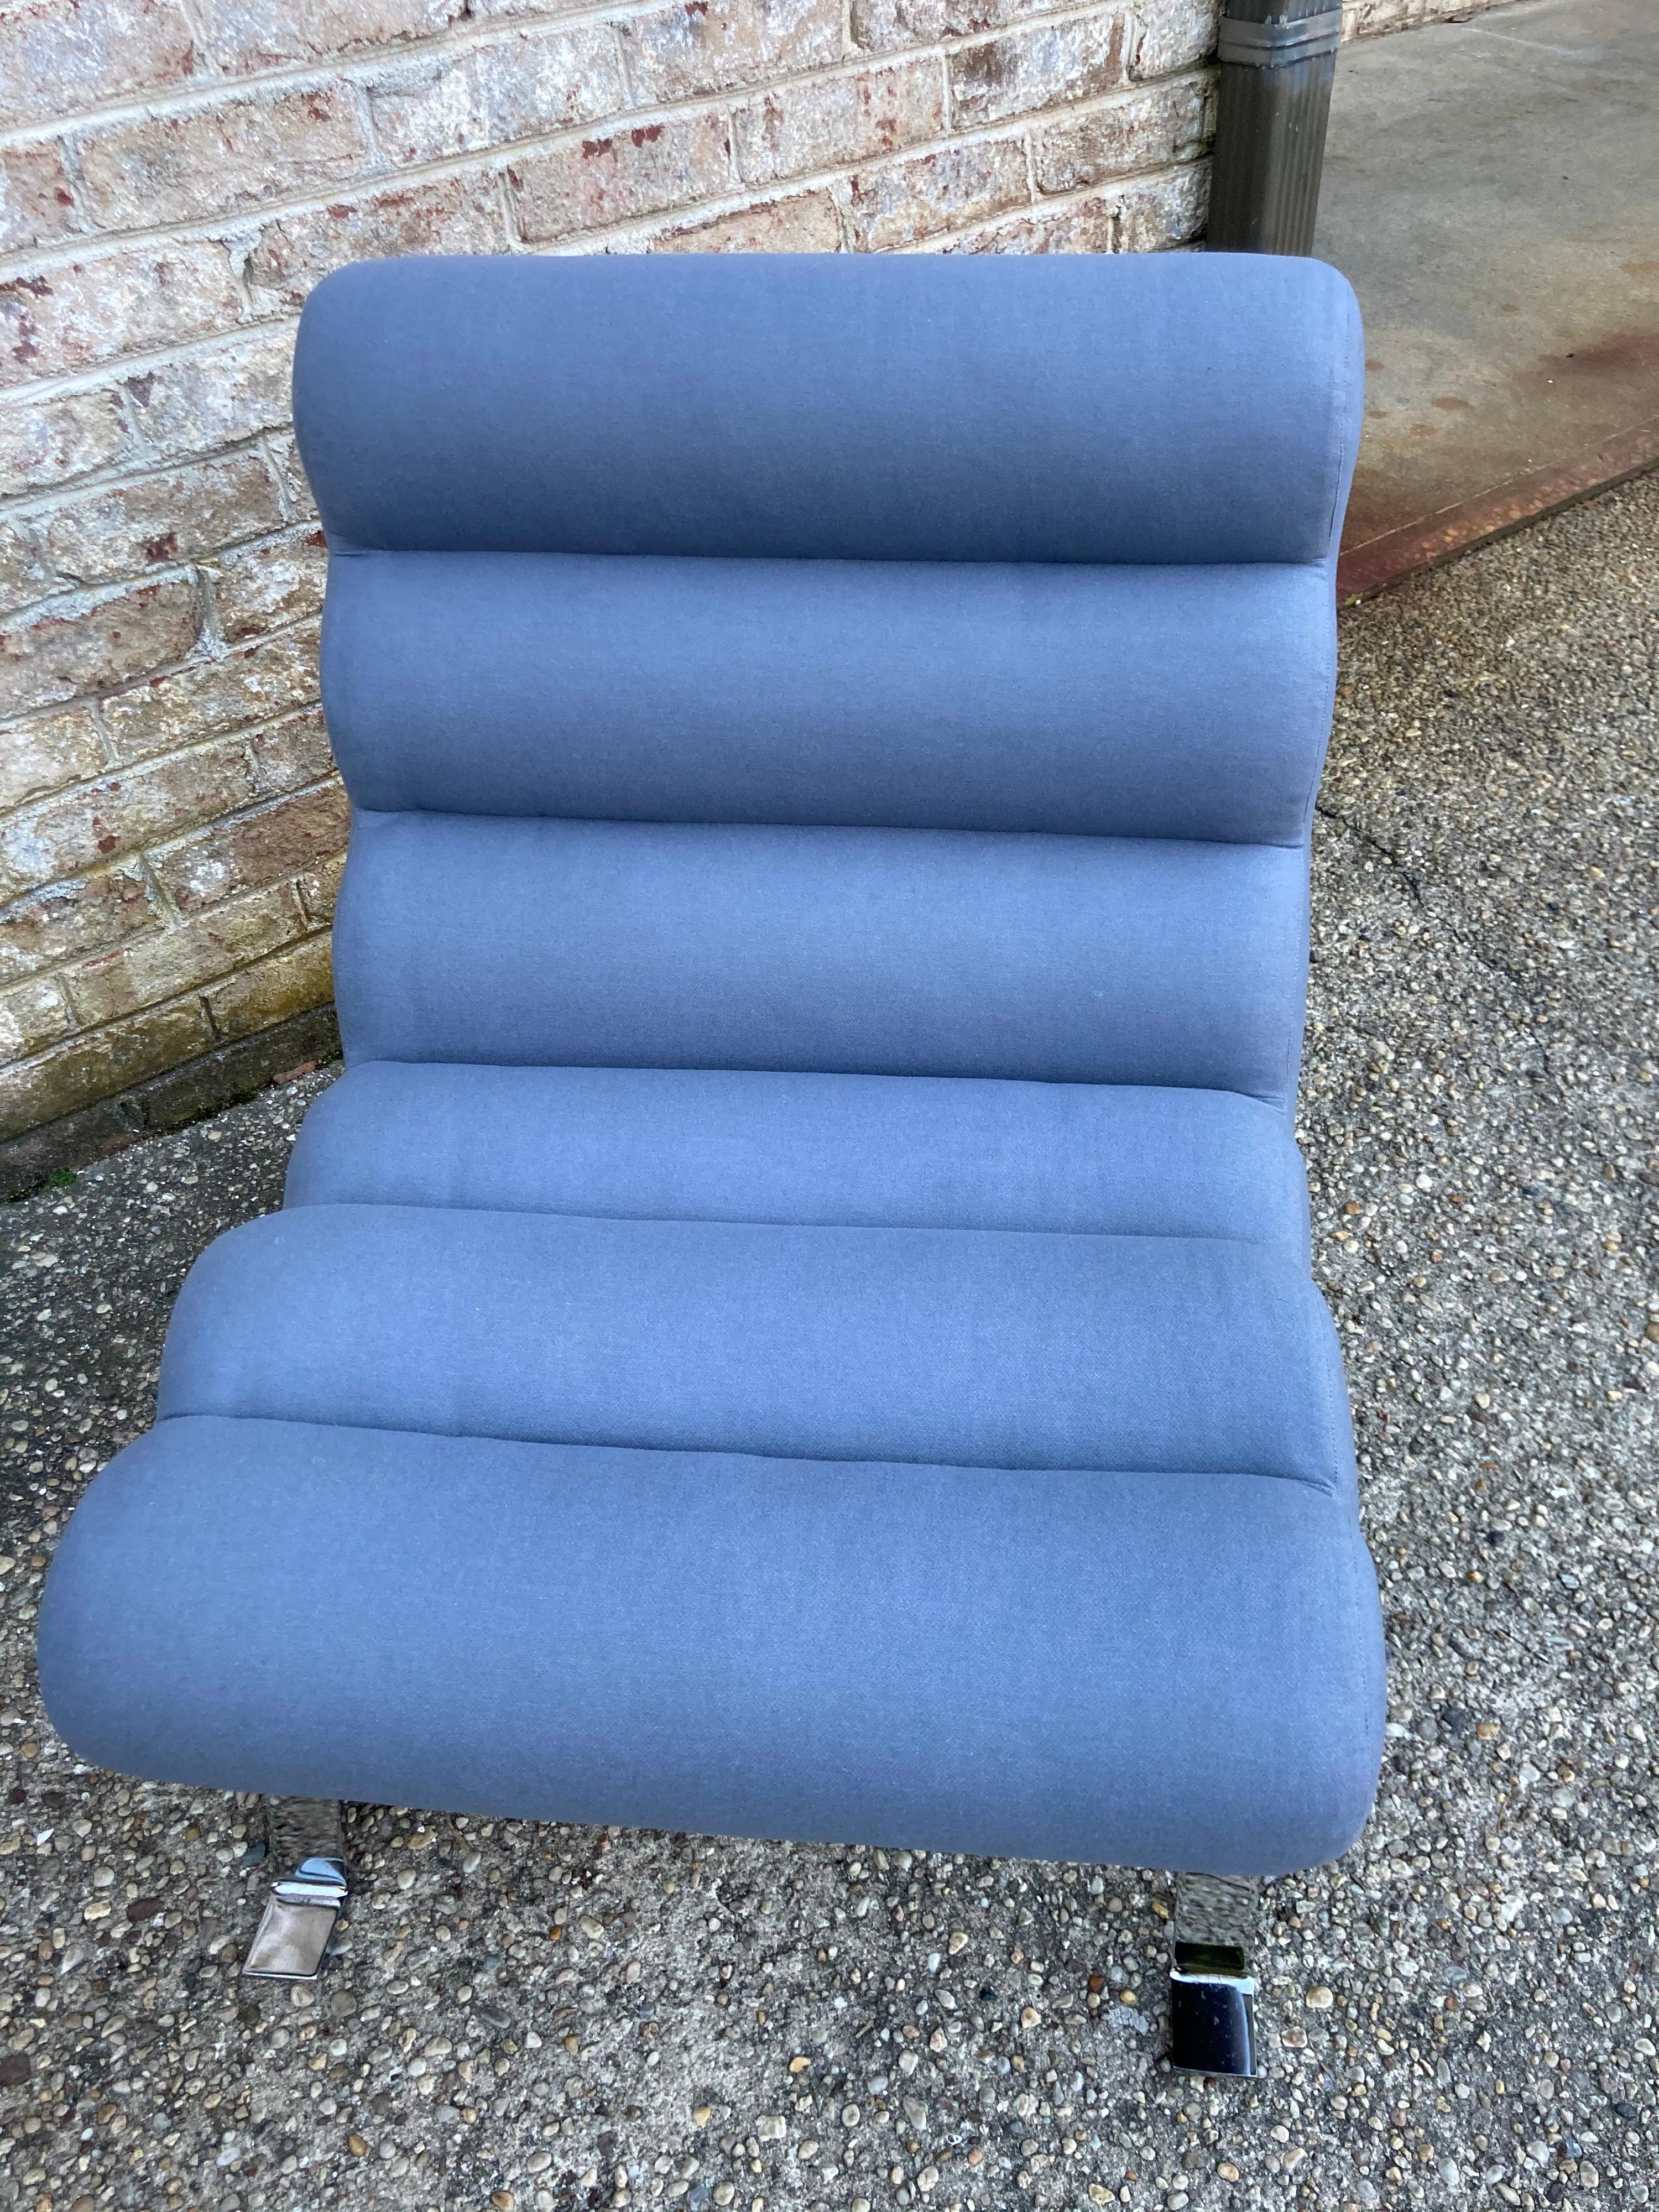 Vintage armless chair with channeled upholstered in gray cashmere/wool blend..... on a chrome base.... all newly reupholstered.